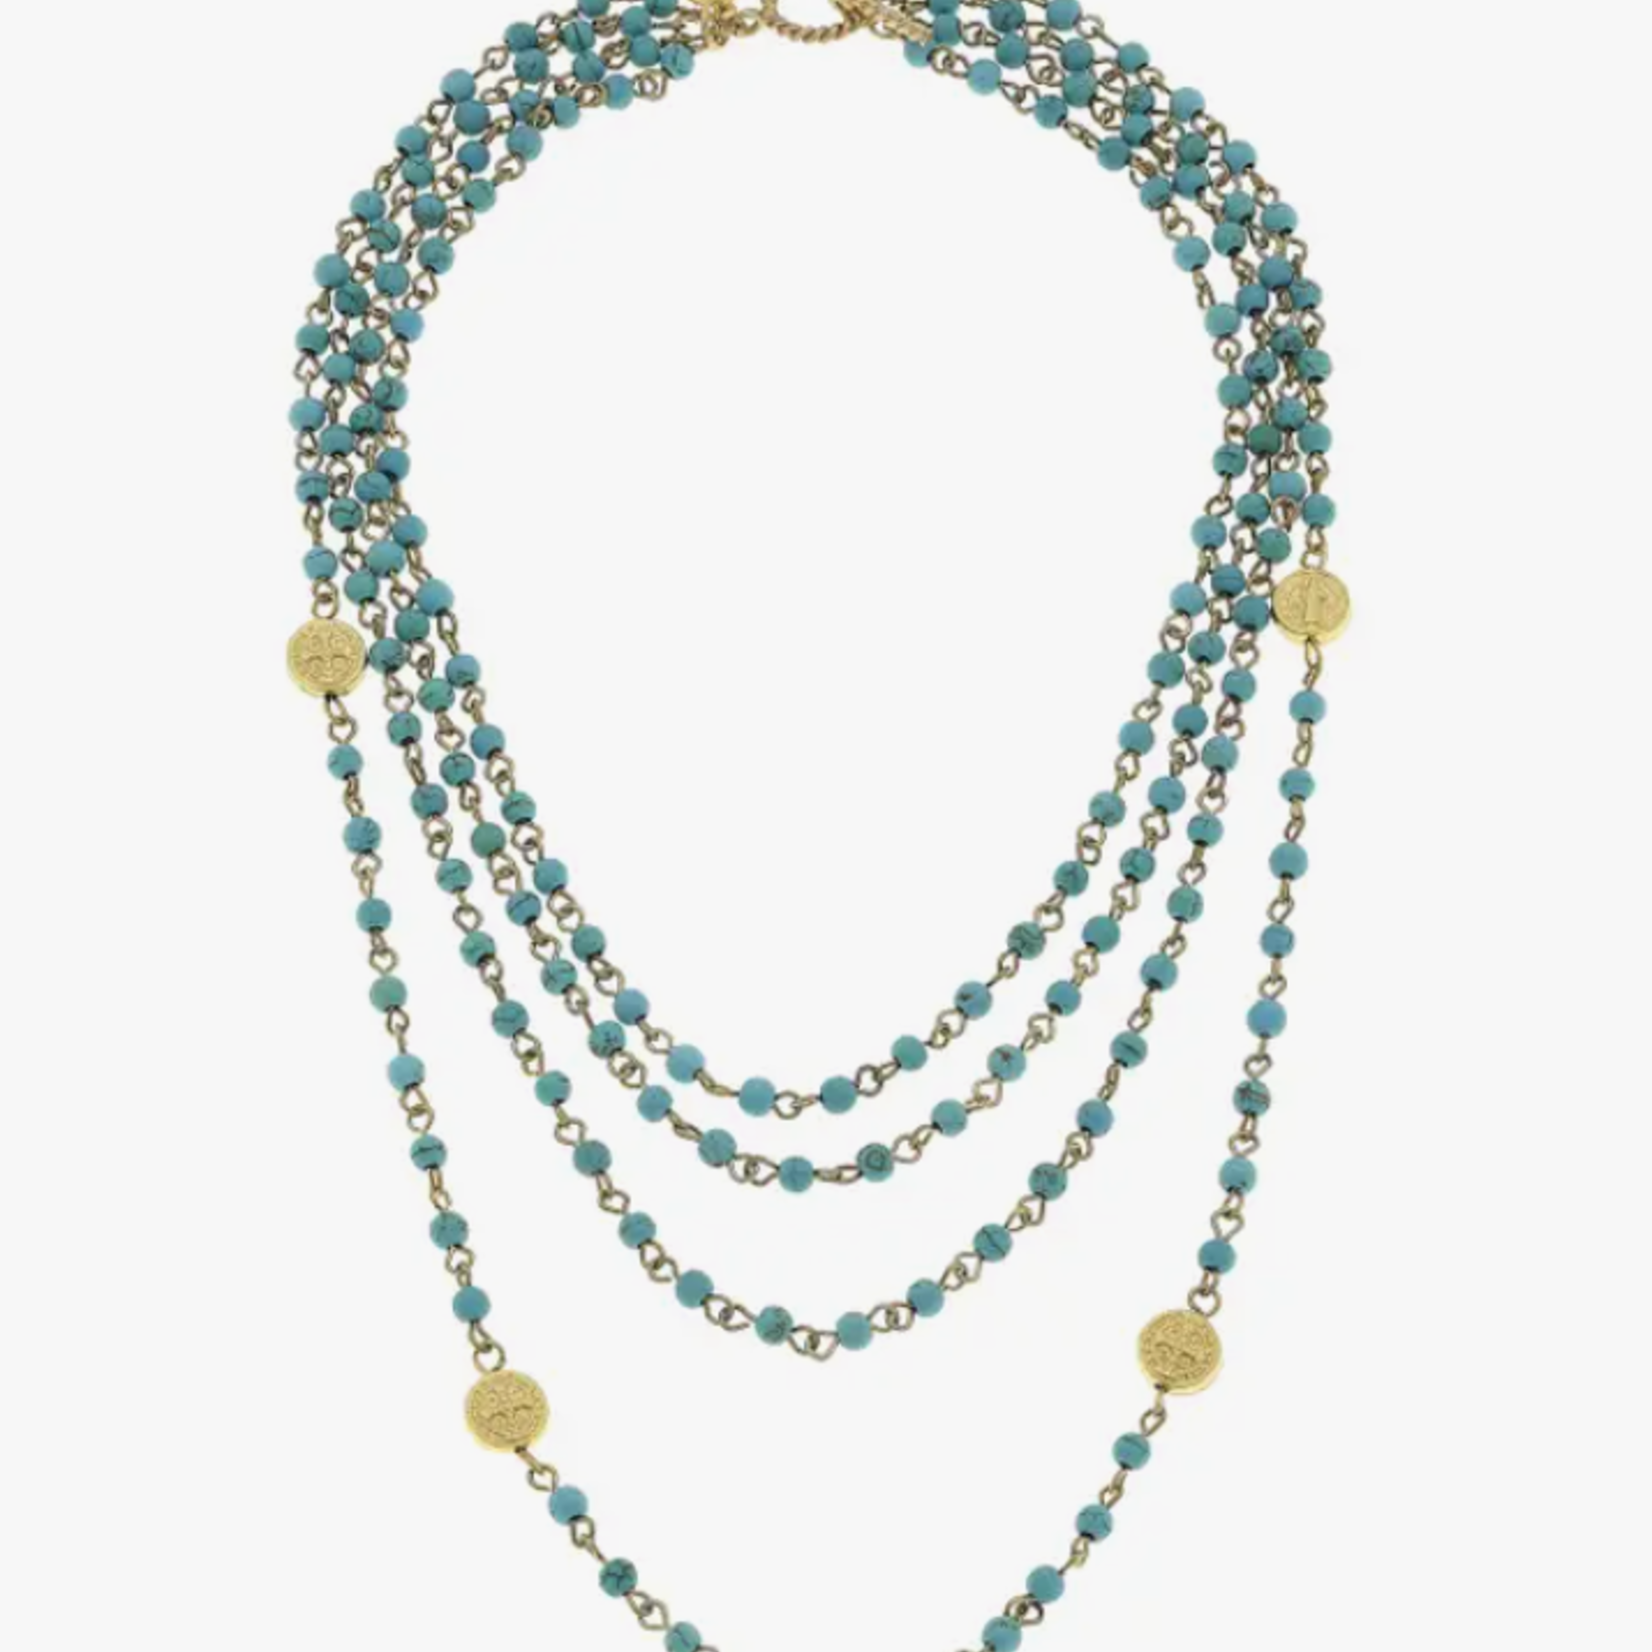 susan shaw Turquoise Linked Necklace